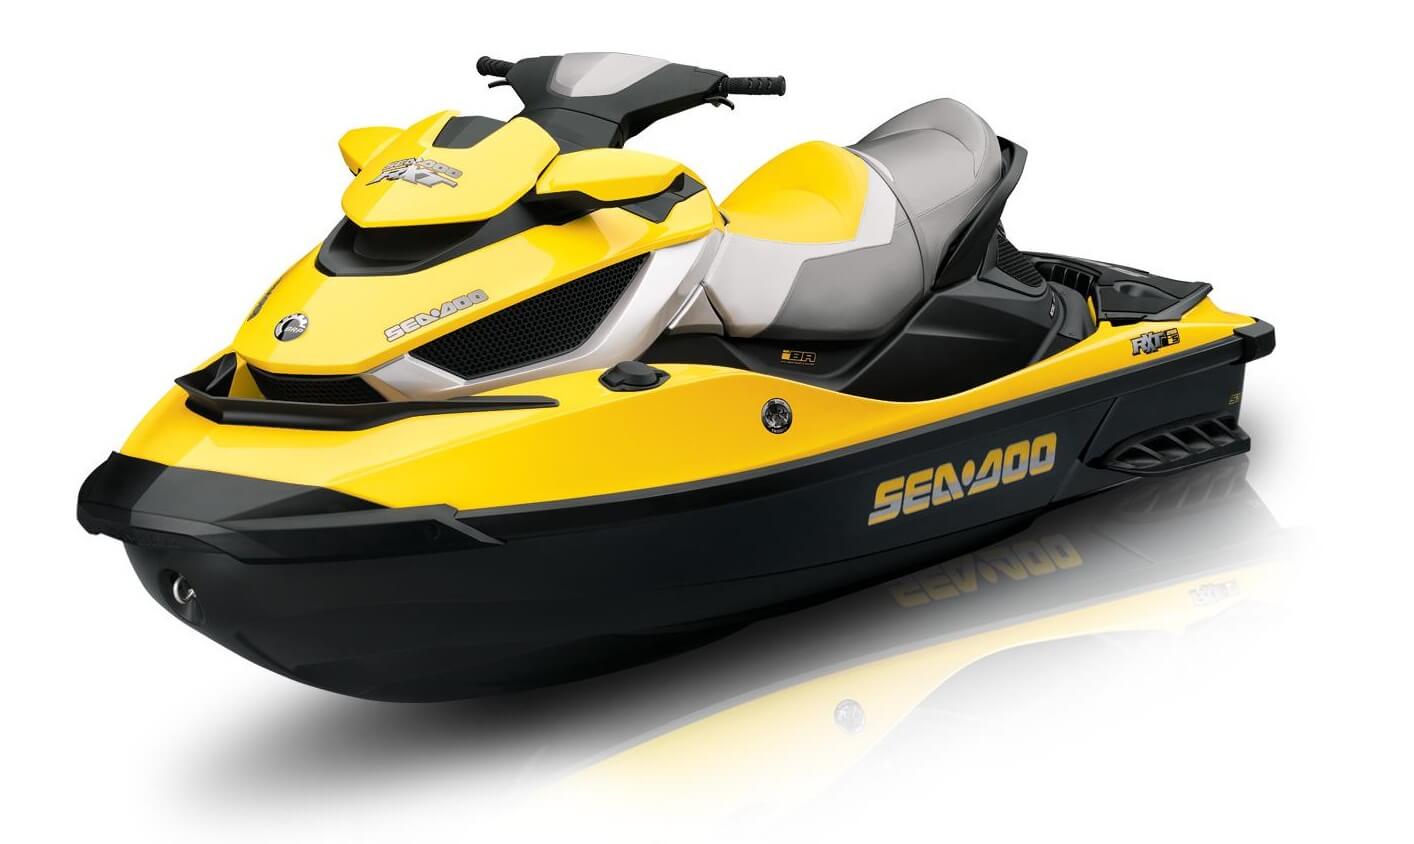 Sale of jet skis in Israel: experience exciting adventures on the water